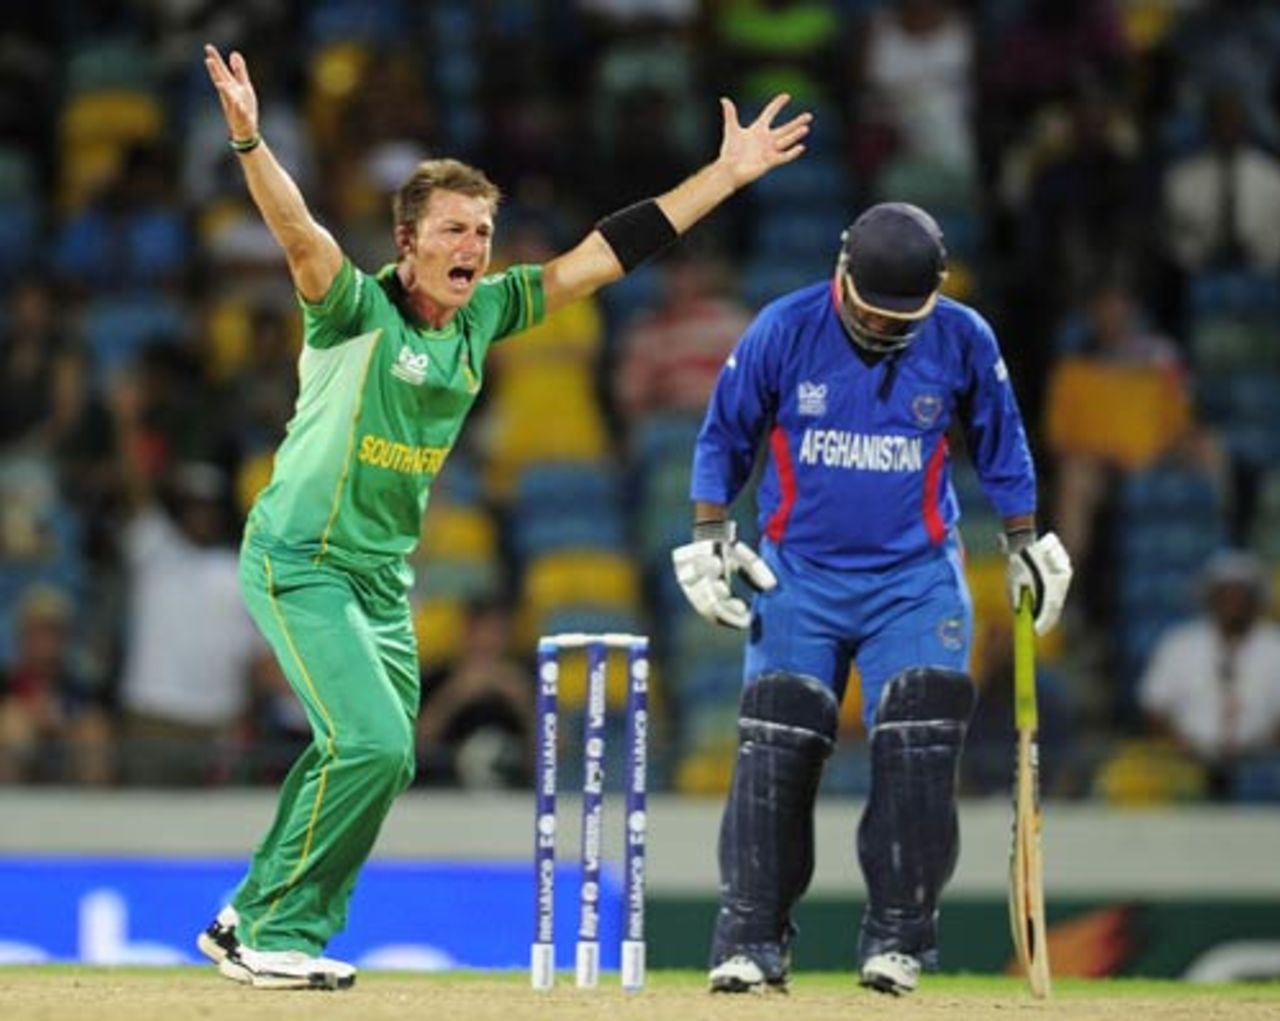 Dale Steyn appeals for the wicket of Mohammad Shahzad, Afghanistan v South Africa, ICC World Twenty20, Bridgetown, May 5, 2010